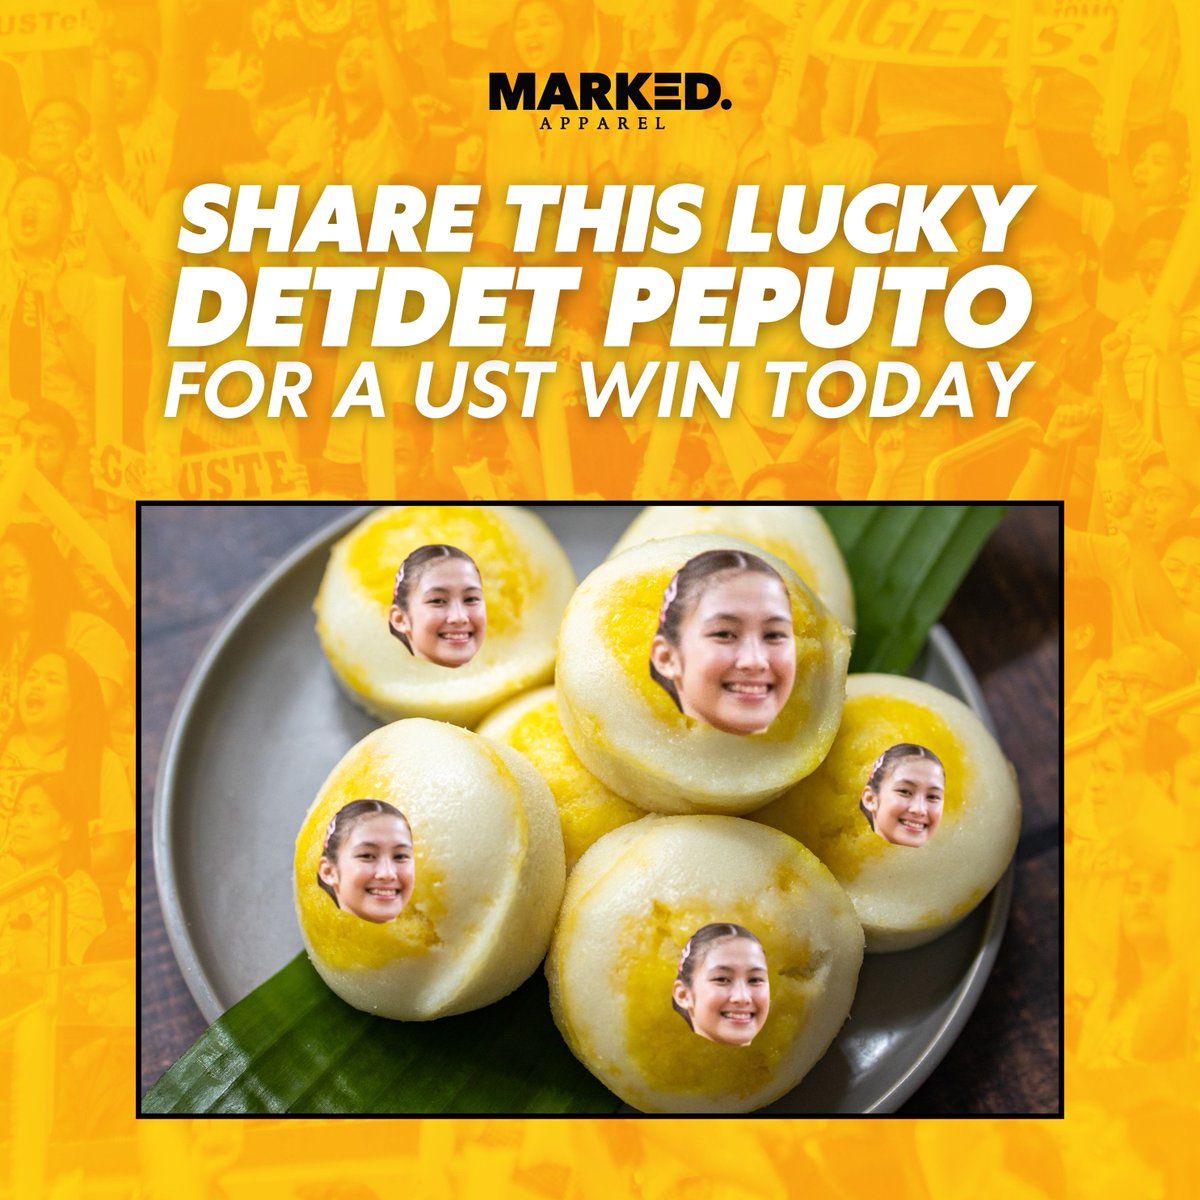 Let's release all the pressure and spread positive energy and fun within the Thomasian community! Let's share this luck, Detdet Peputo, for a UST win today!

#GoUSTe #UAAPSeason86 #UAAPVolleyball  #USTvsNU #UAAPFinals